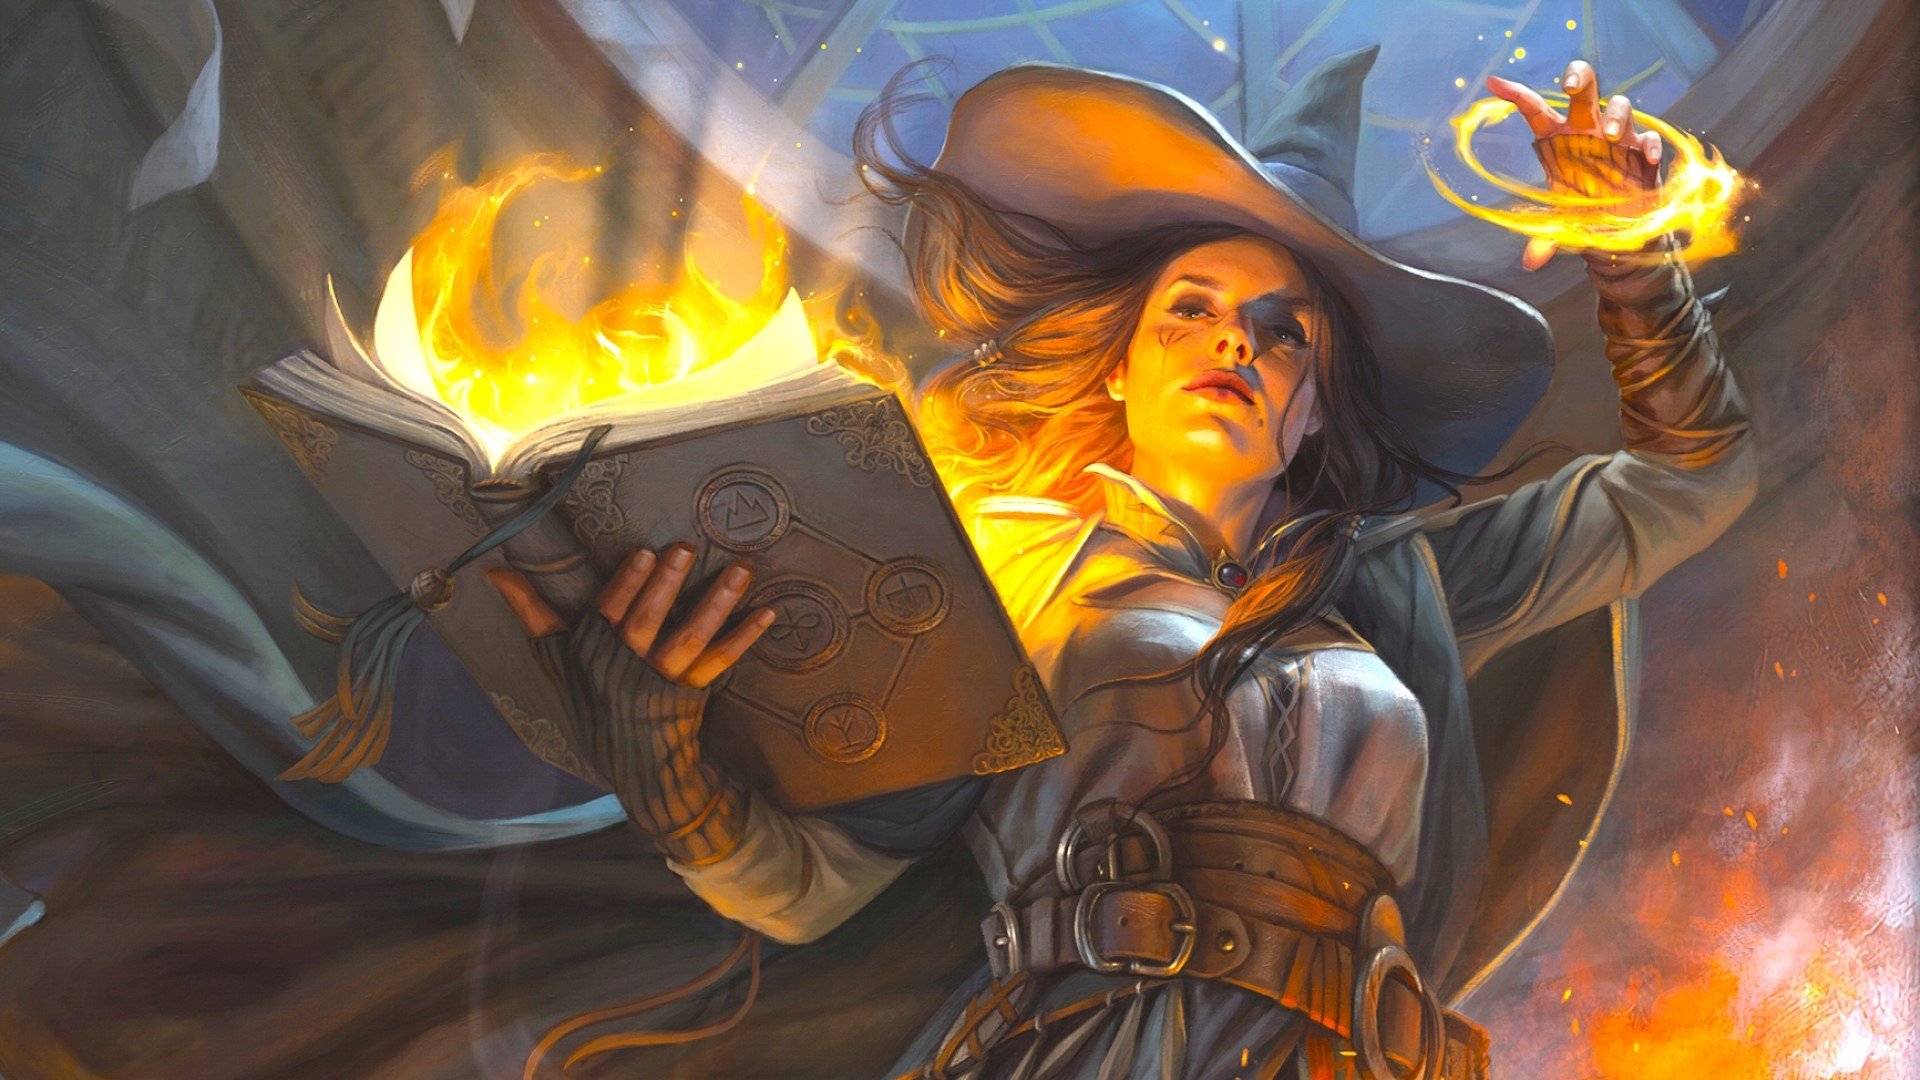 DnD detect thoughts 5e - Wizards of the Coast art of a wizard casting spells from a spellbook